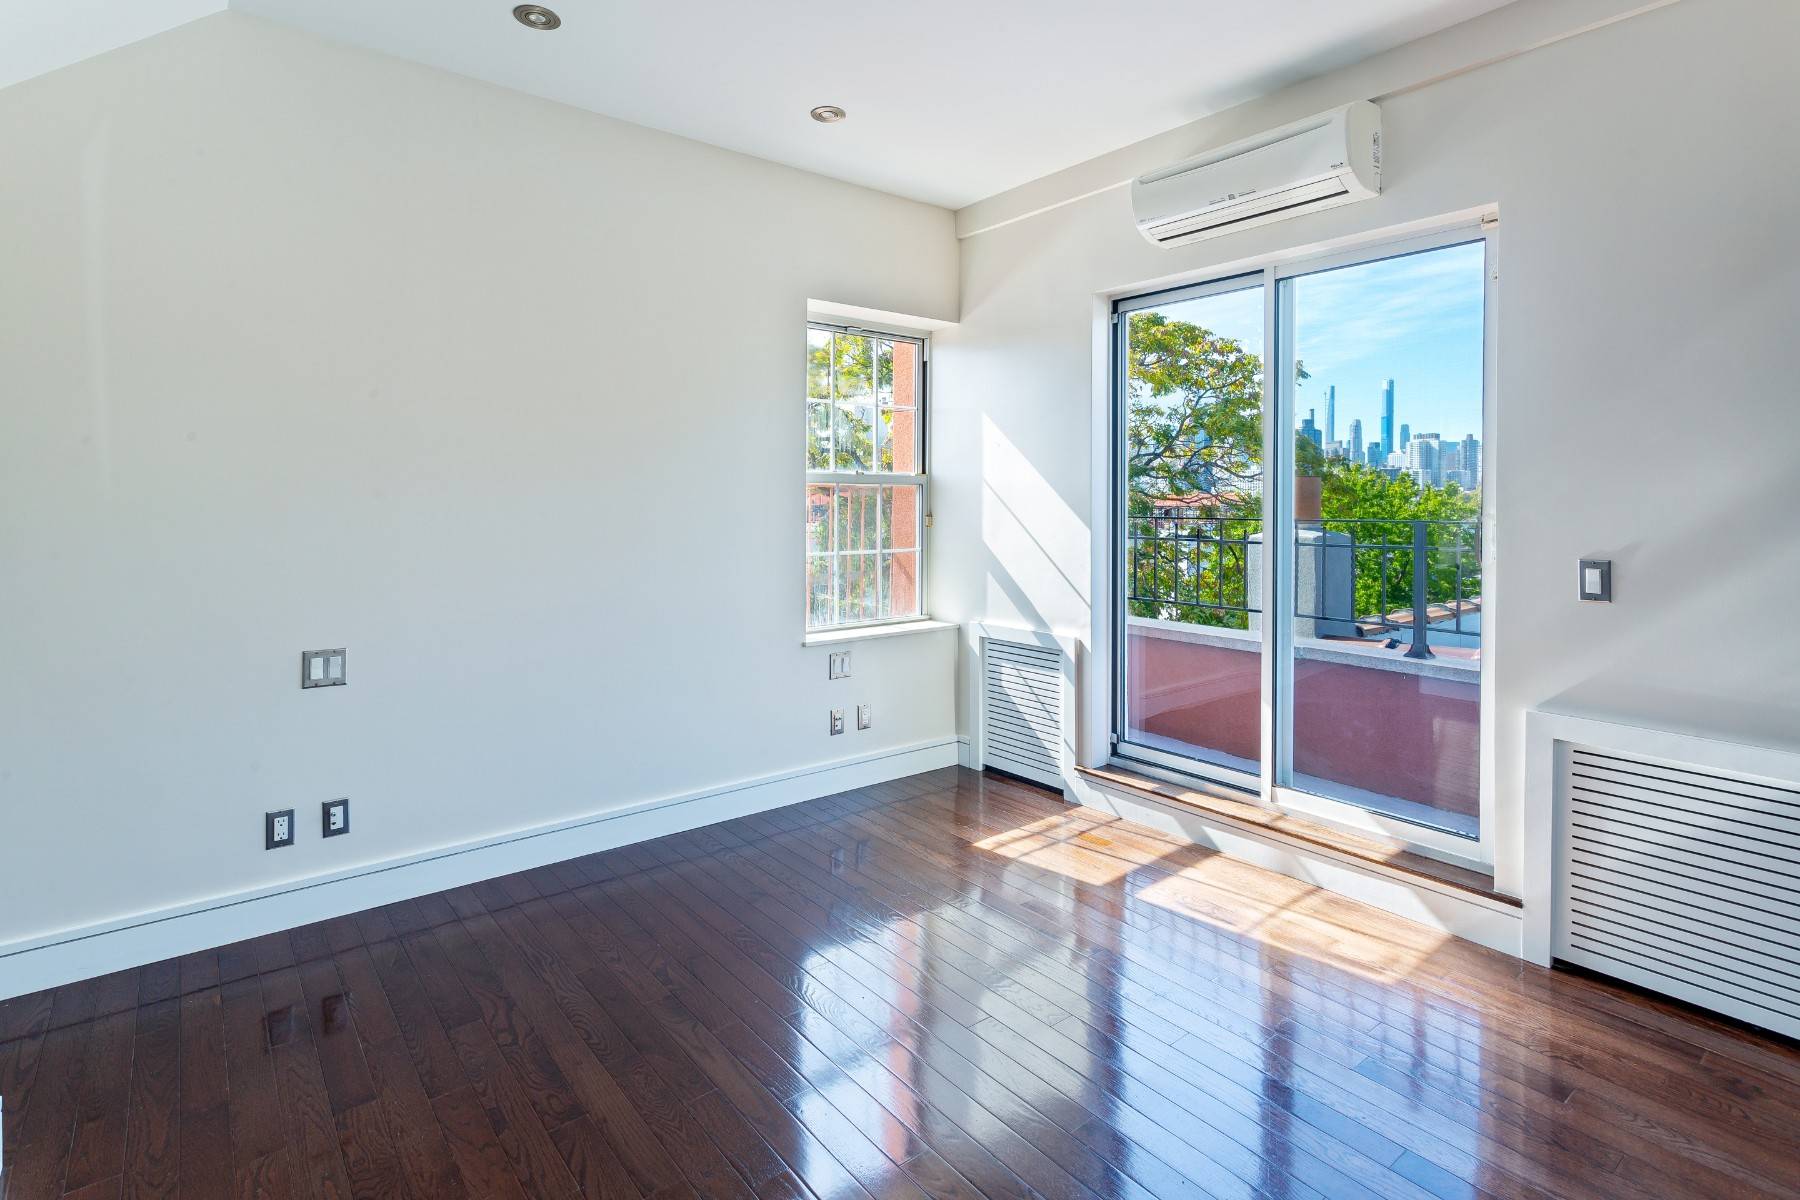 One of a kind two bedroom, 2 bath with dramatic views in Astoria by waterfront.